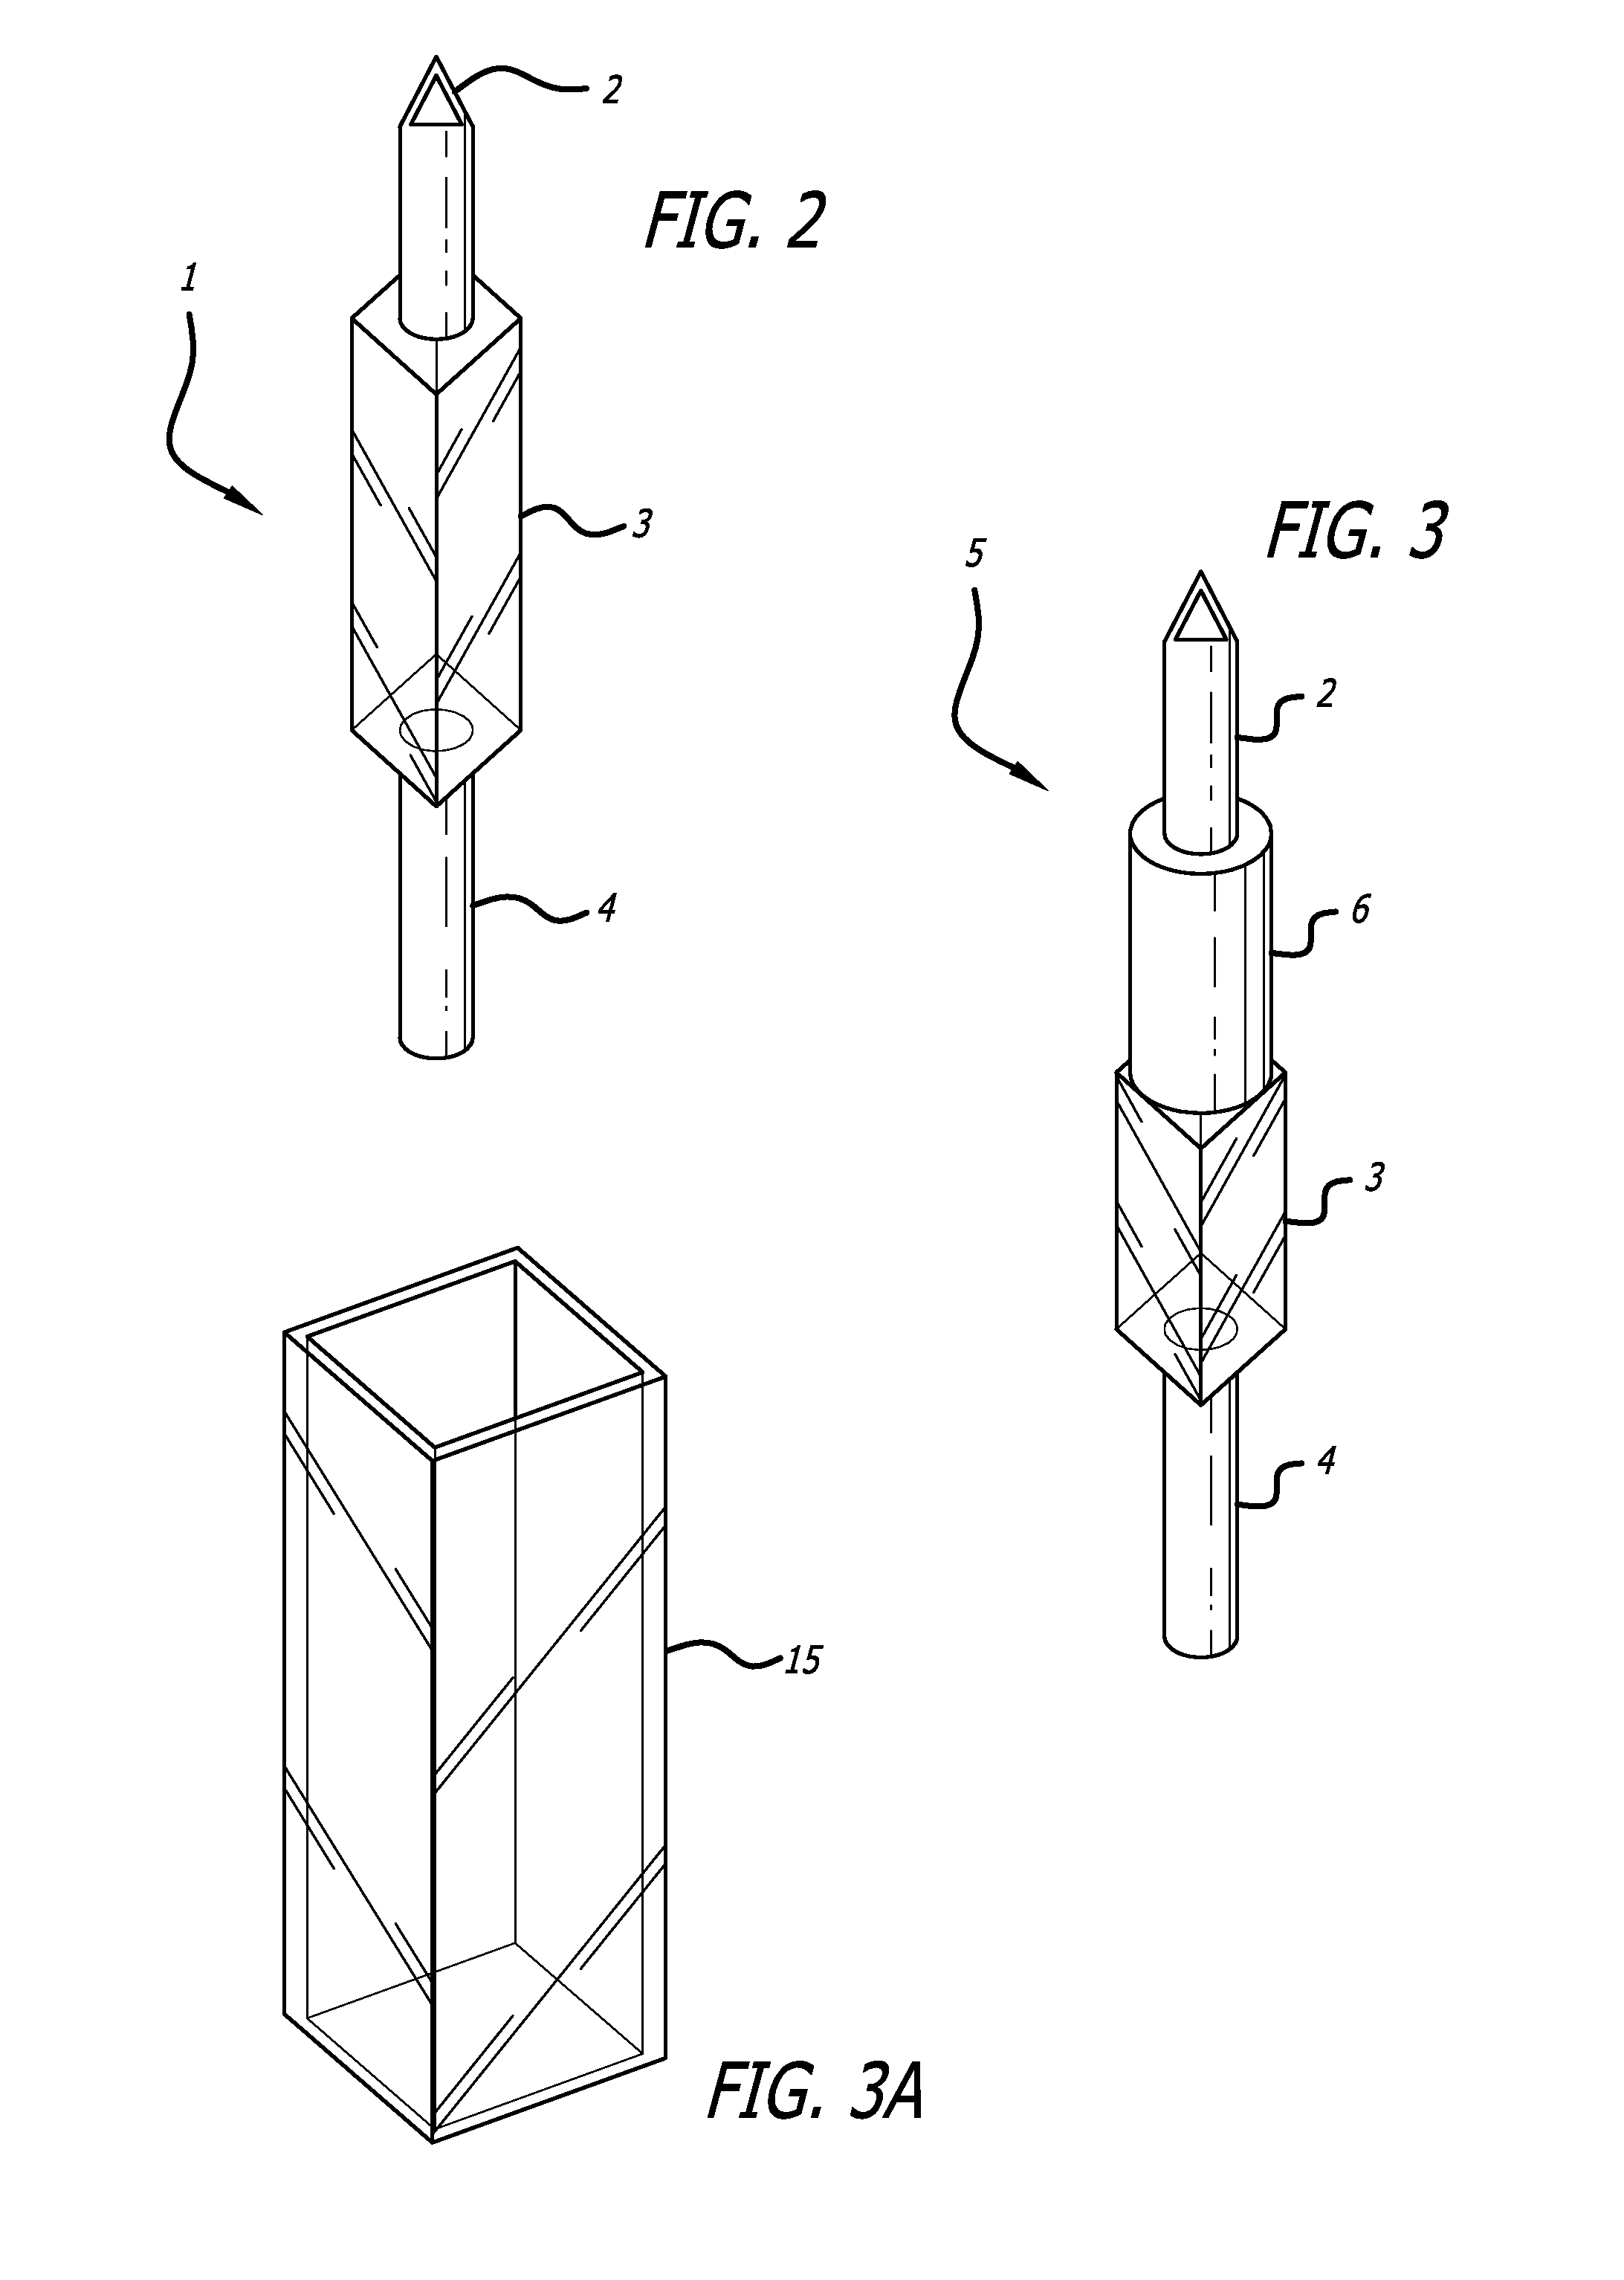 Infusion Set And Spectroscopic Analyzer For Analysis Of Pharmaceuticals